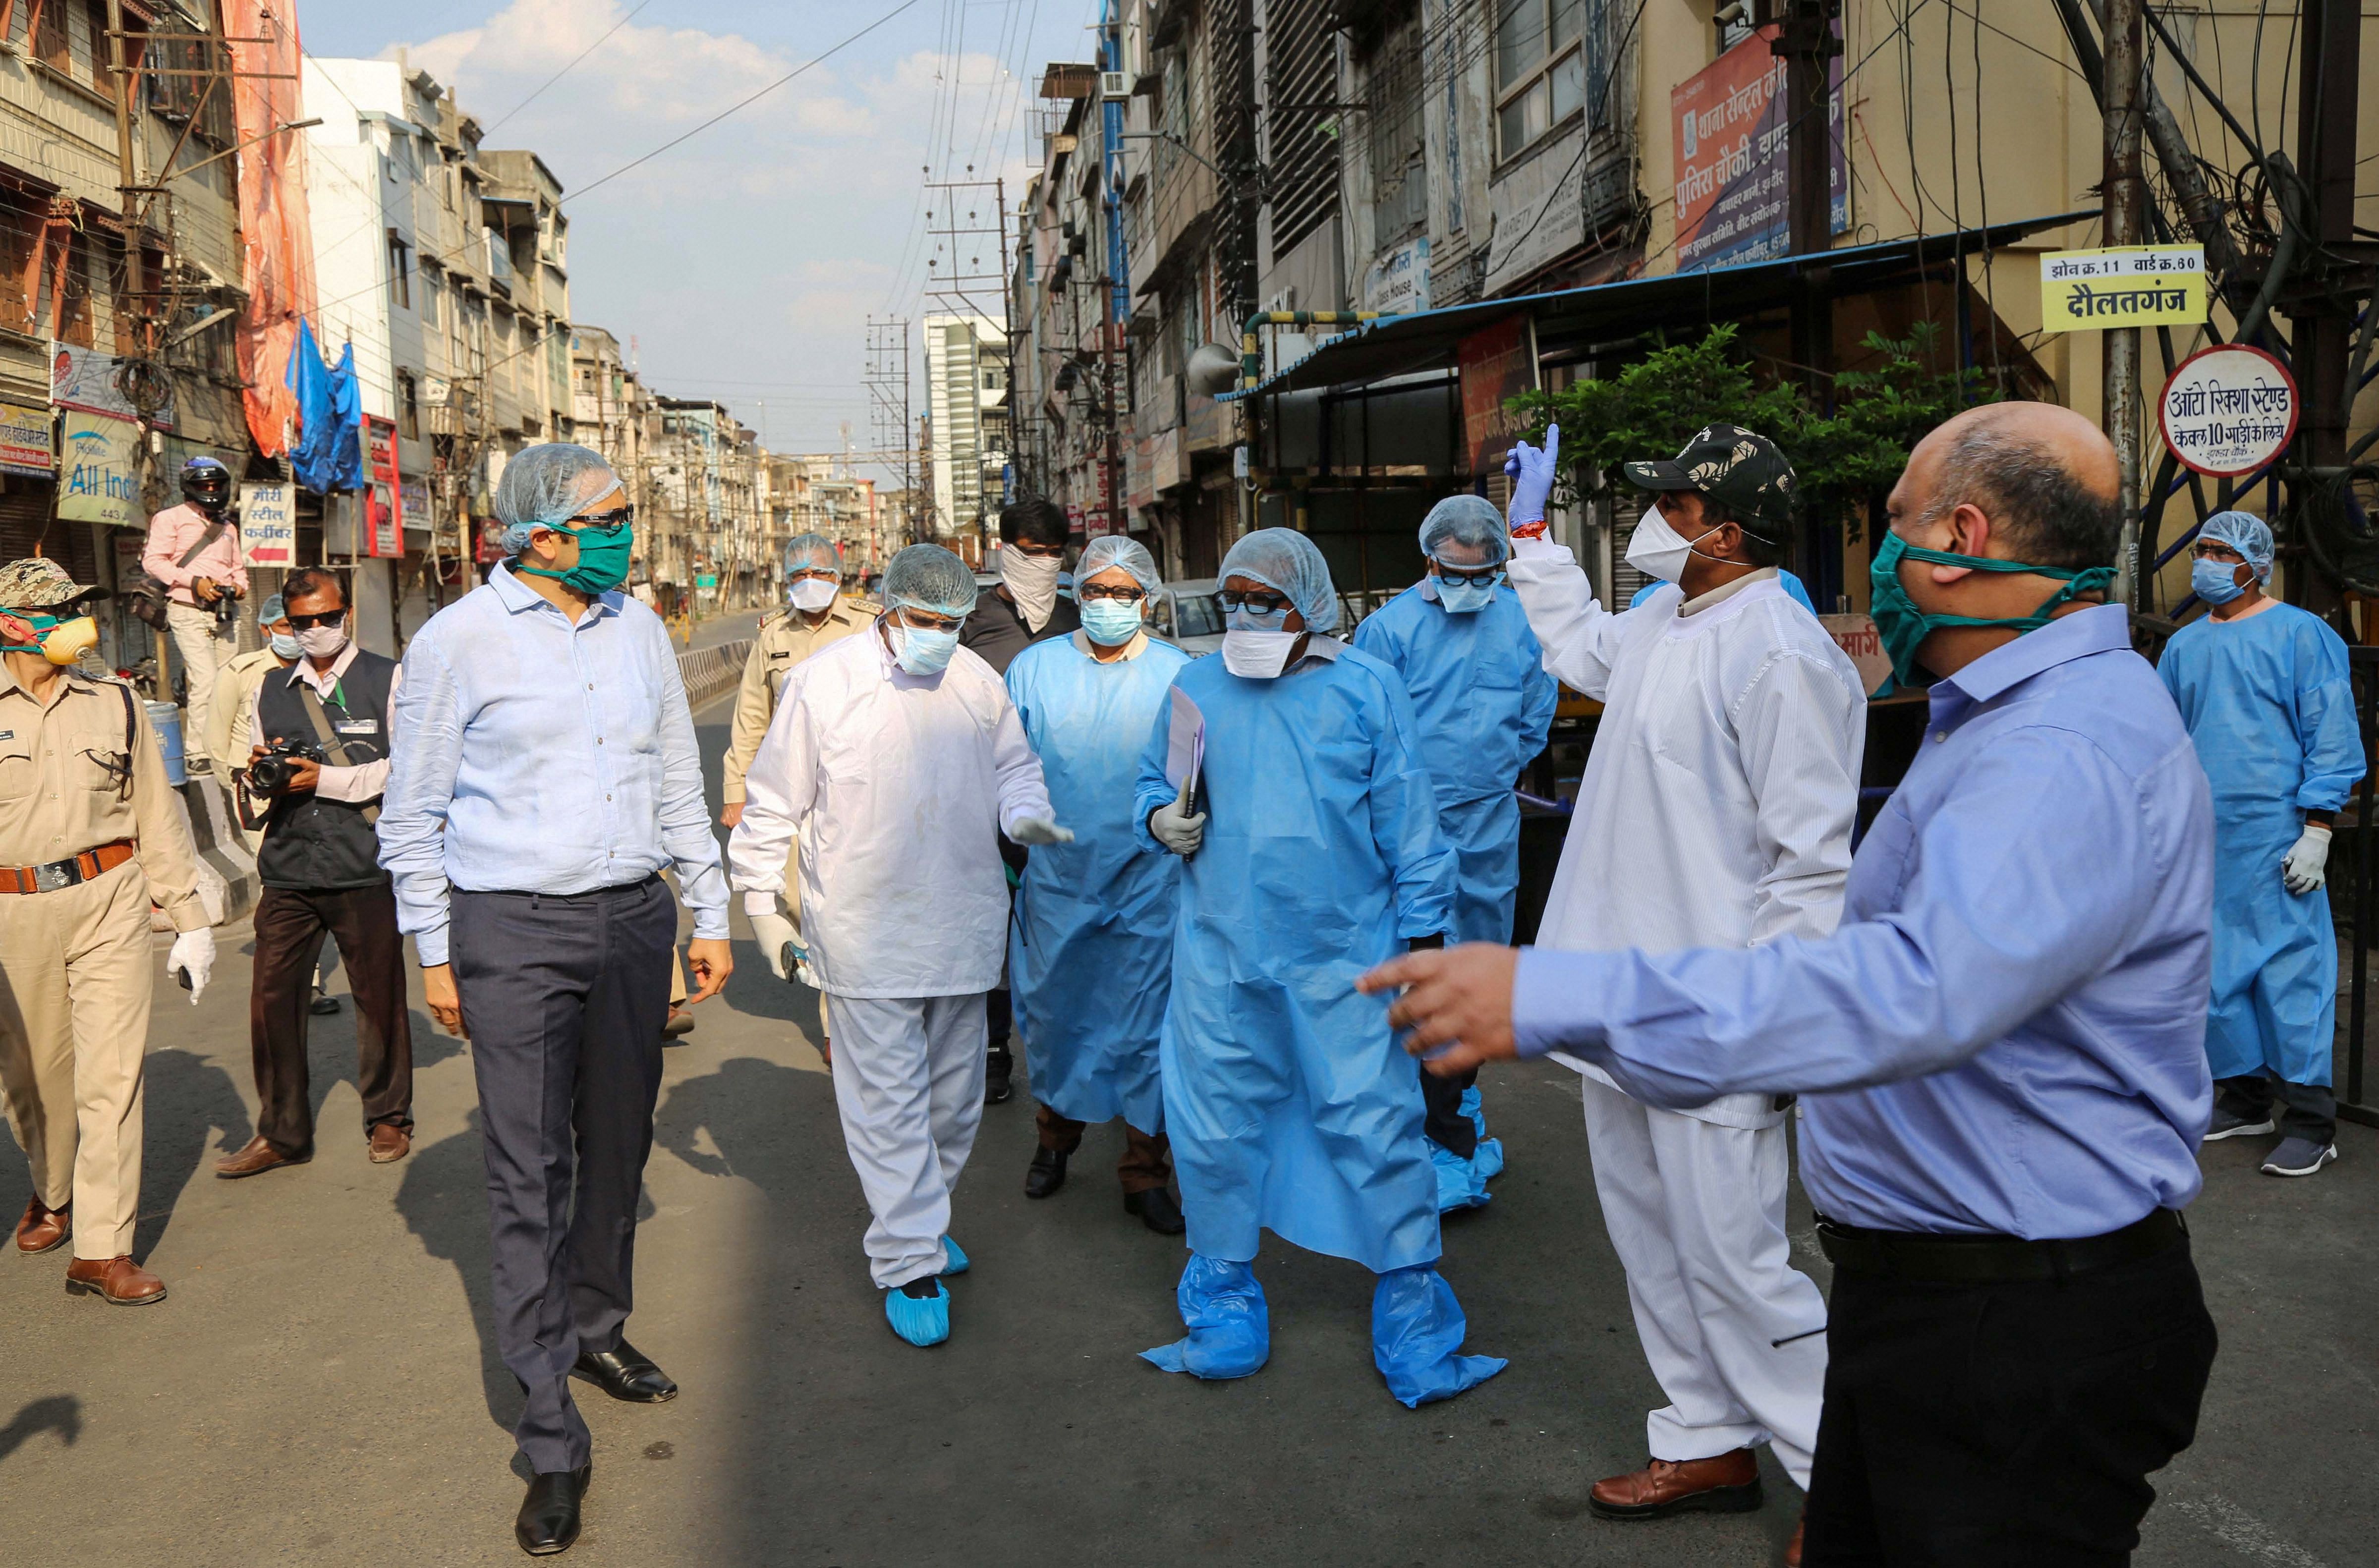 Indore divisional commissioner Akash Tripathi along with senior officials inspects Taat Patti Bakhal area where health workers were attacked by some locals who went there to screen residents in wake of COVID 19 pandemic, in Indore. (PTI Photo)